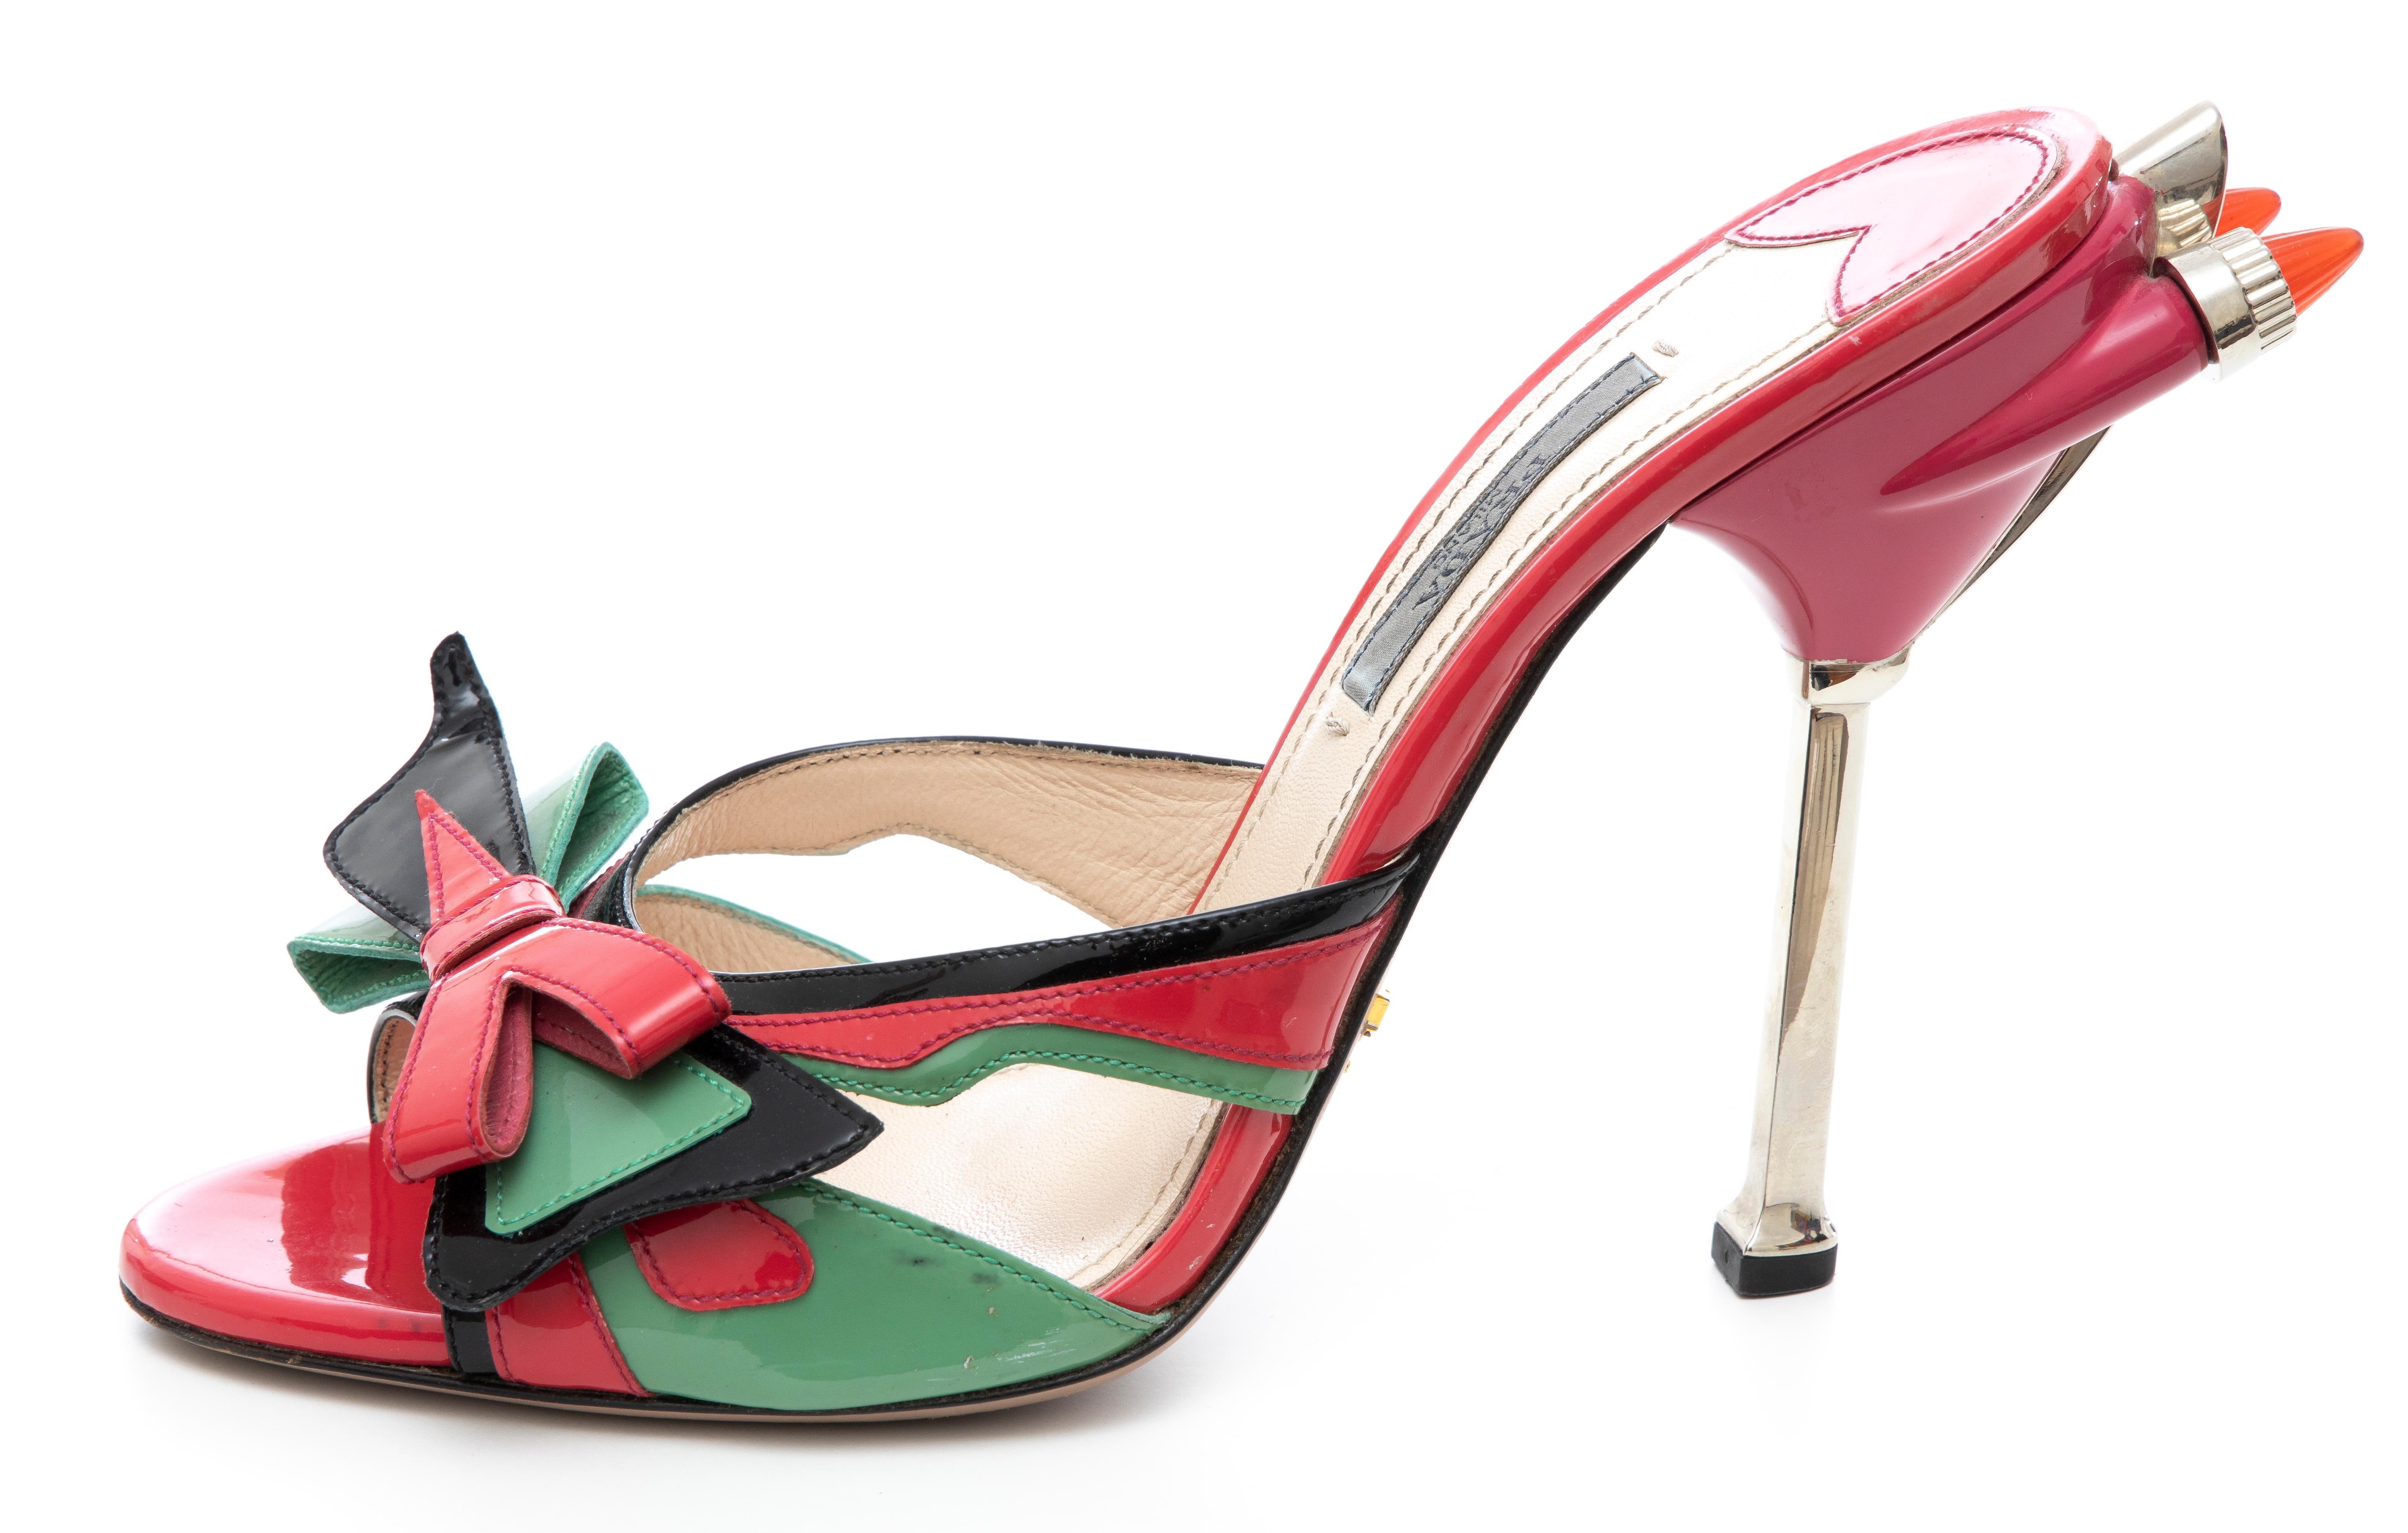 Prada Runway Patent Leather Tail Light Sandal, Spring 2012 For Sale 5